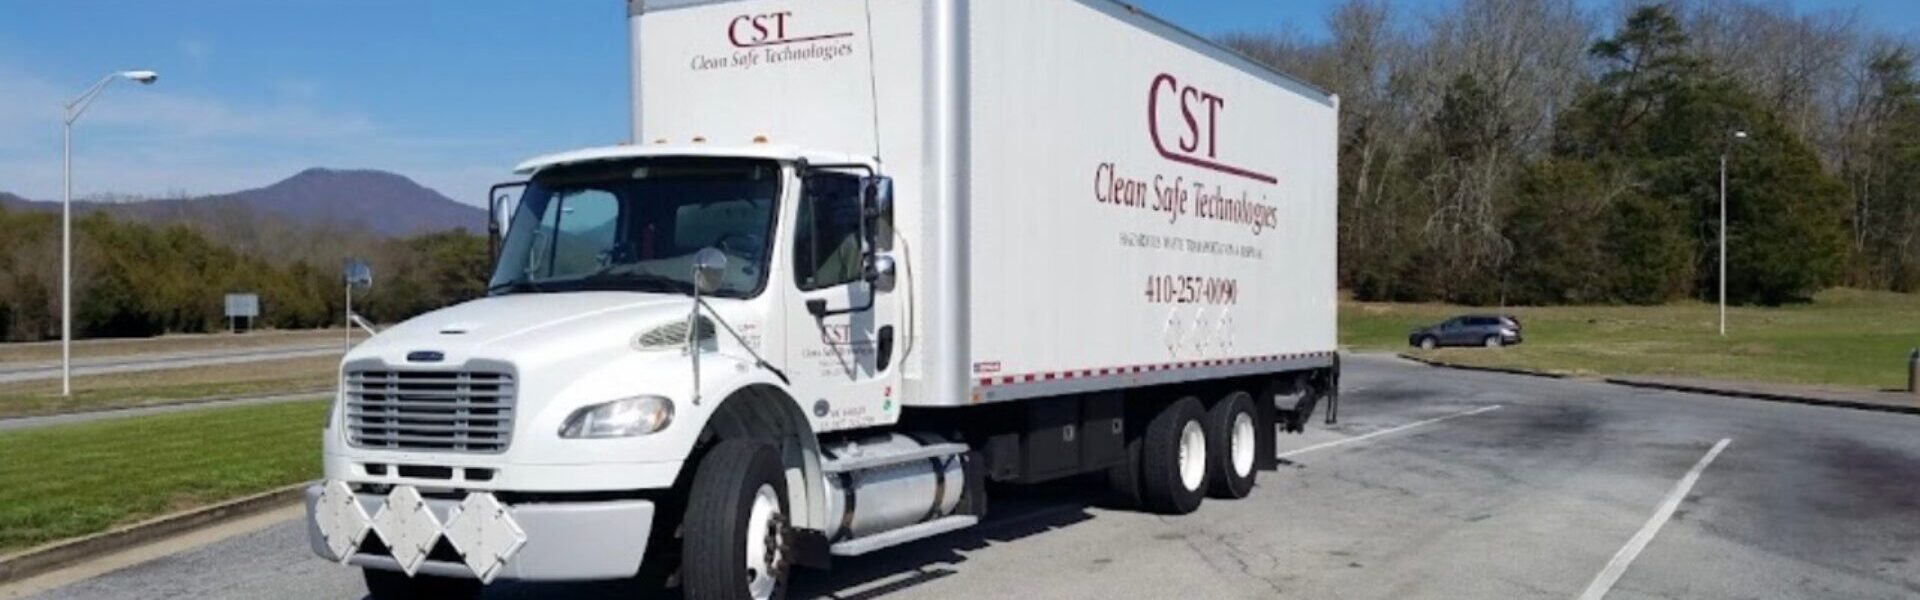 A white colored Clean safe technologies truck